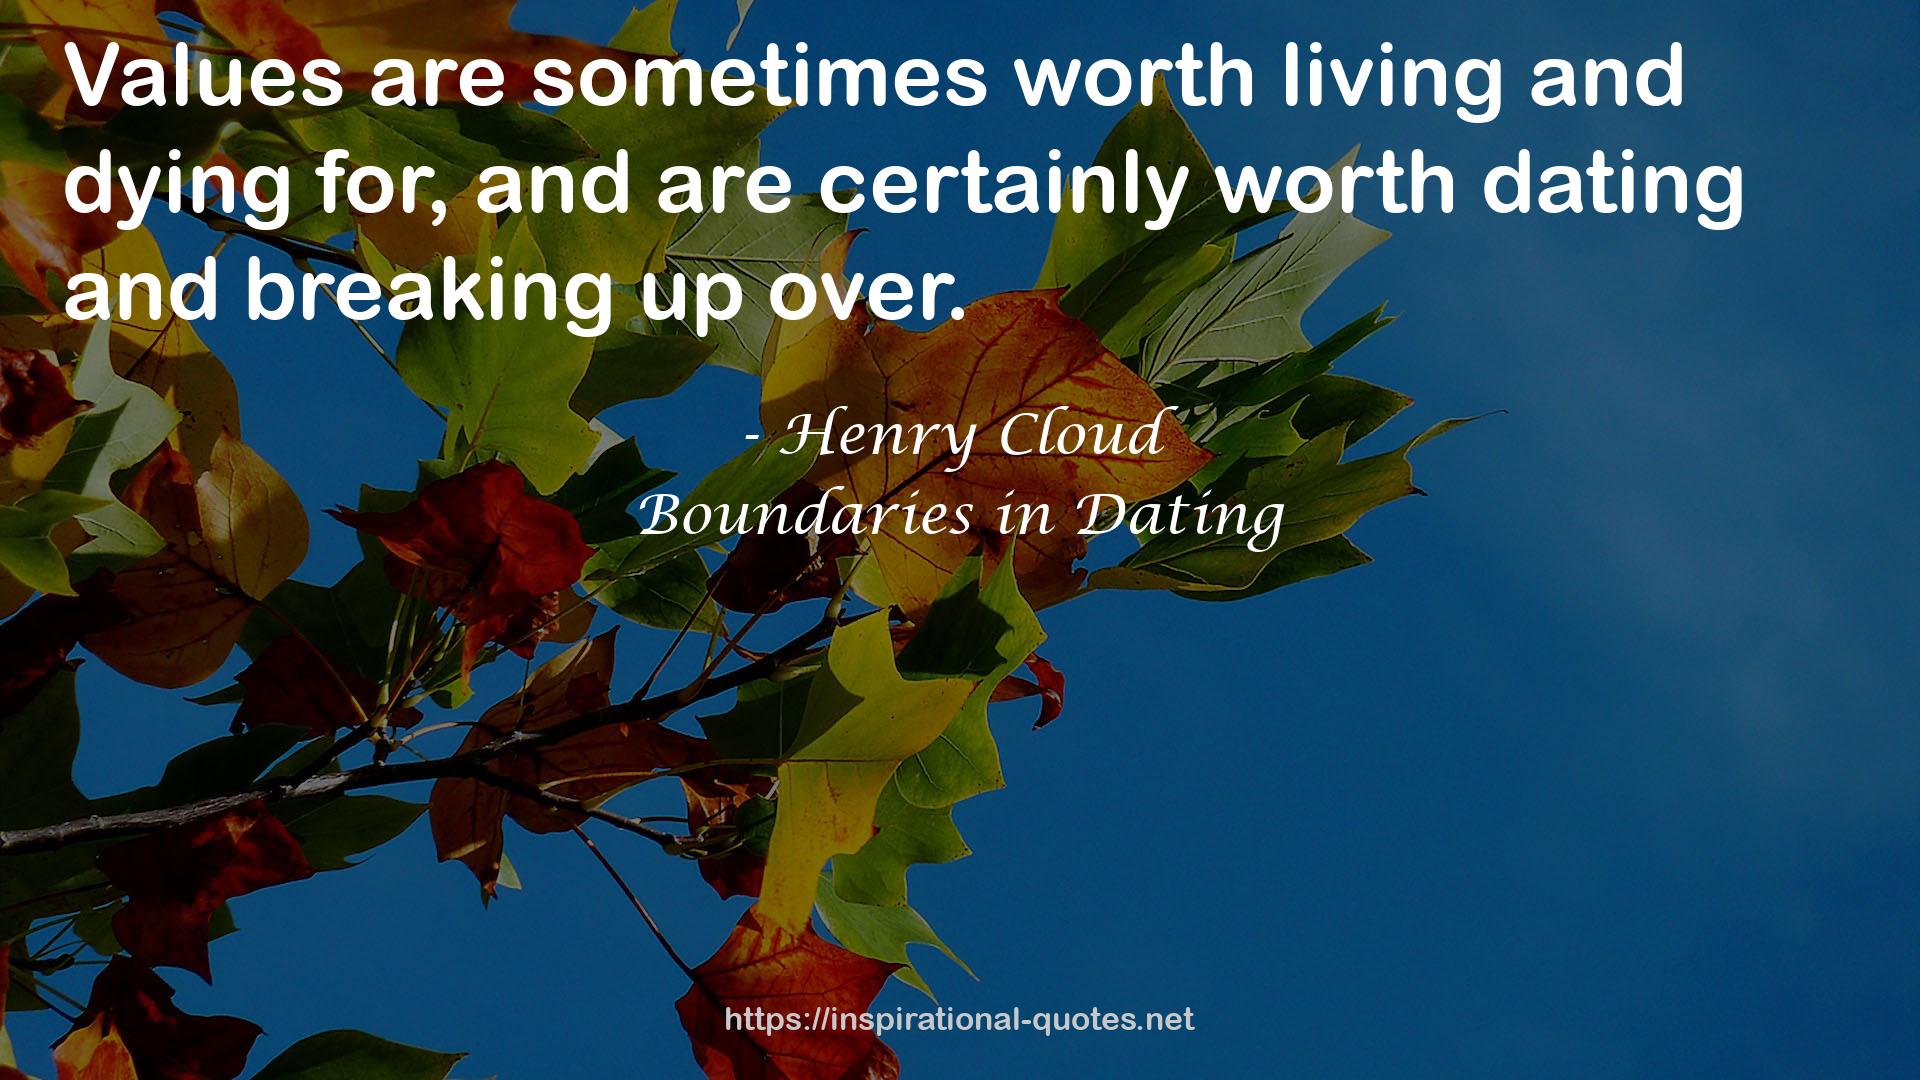 Boundaries in Dating QUOTES